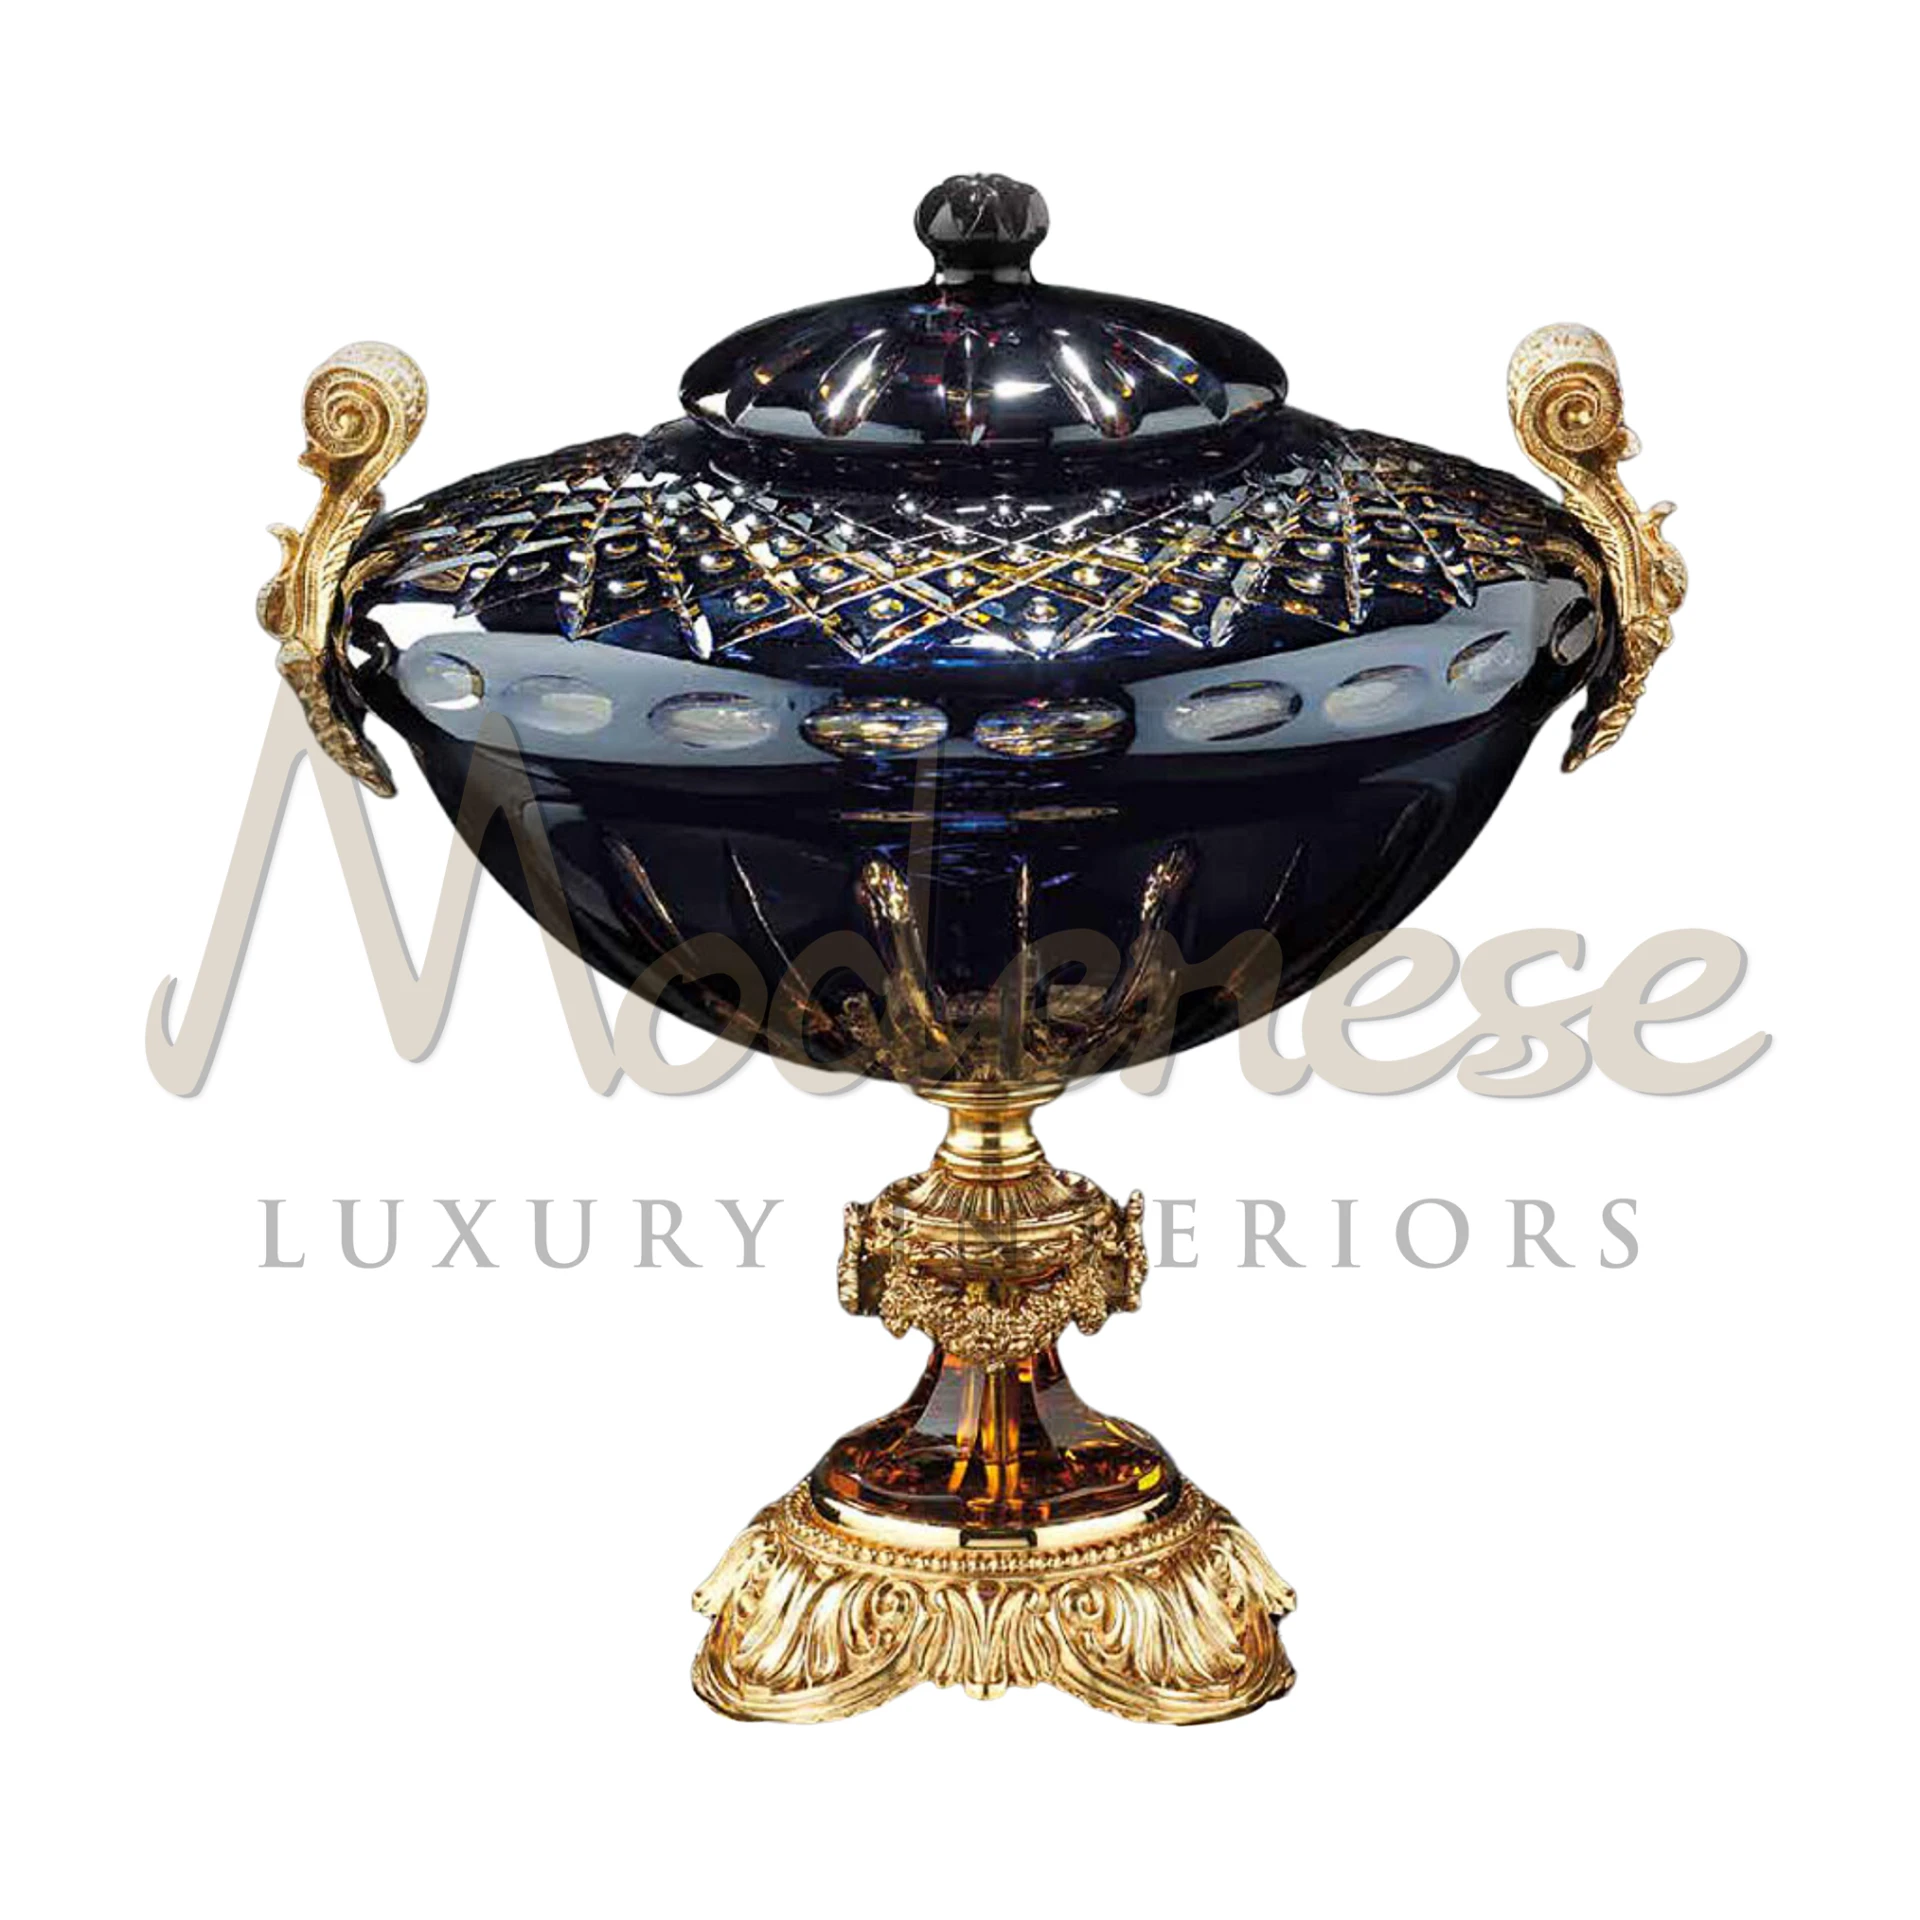 Intricately detailed Classical Glass Vase by Modenese, a statement piece for any luxury interior with its handcrafted elegance.